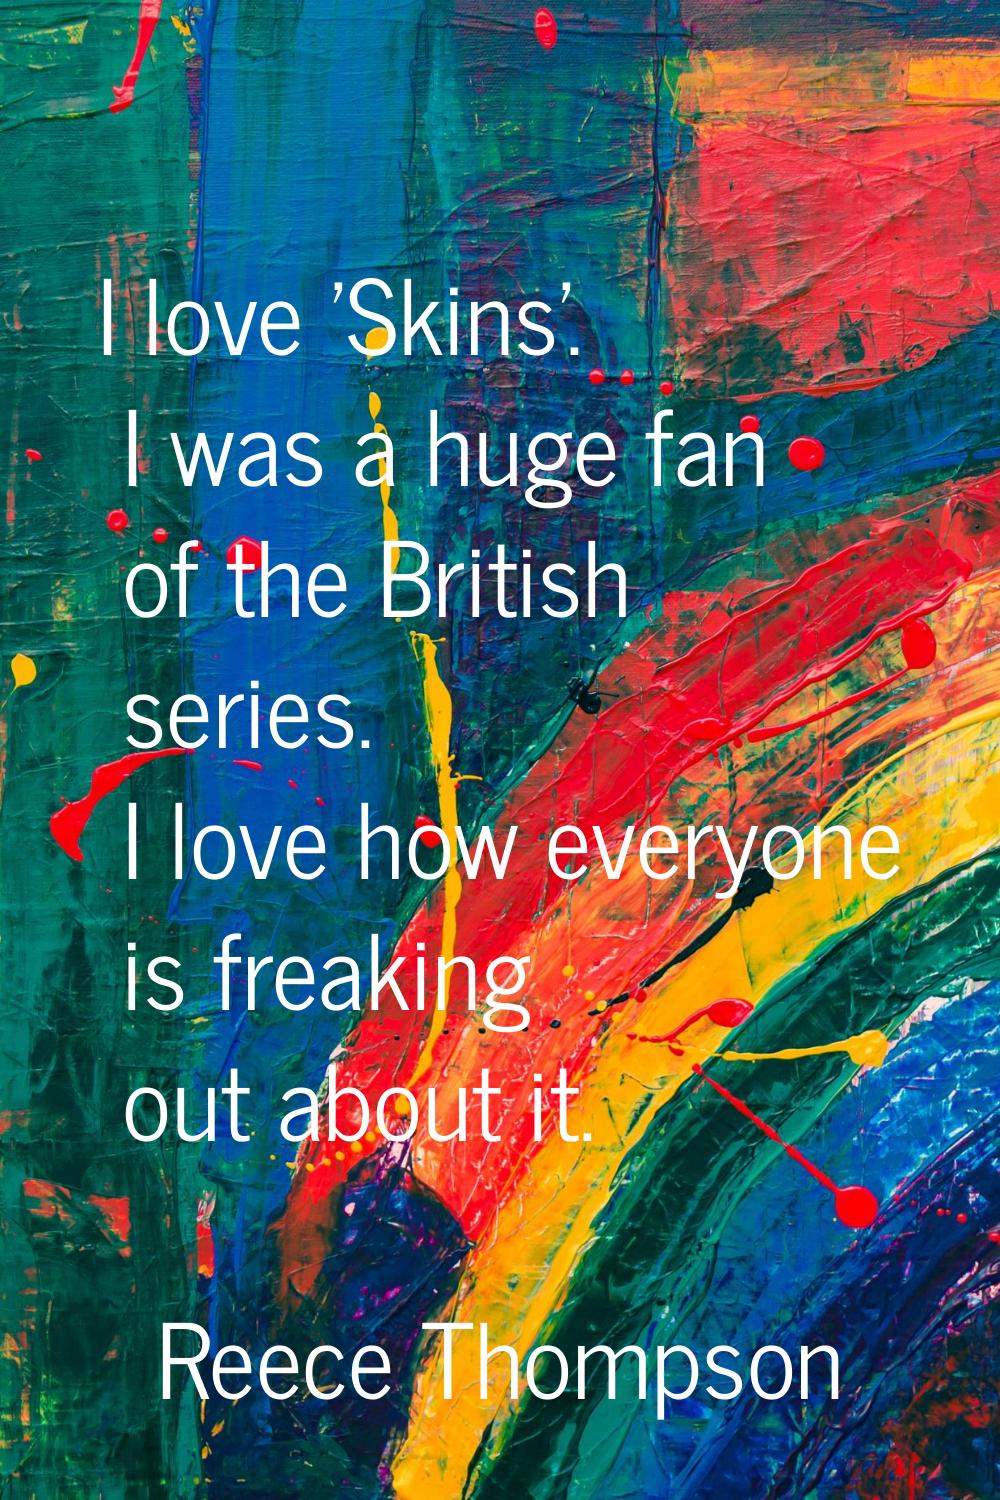 I love 'Skins'. I was a huge fan of the British series. I love how everyone is freaking out about i